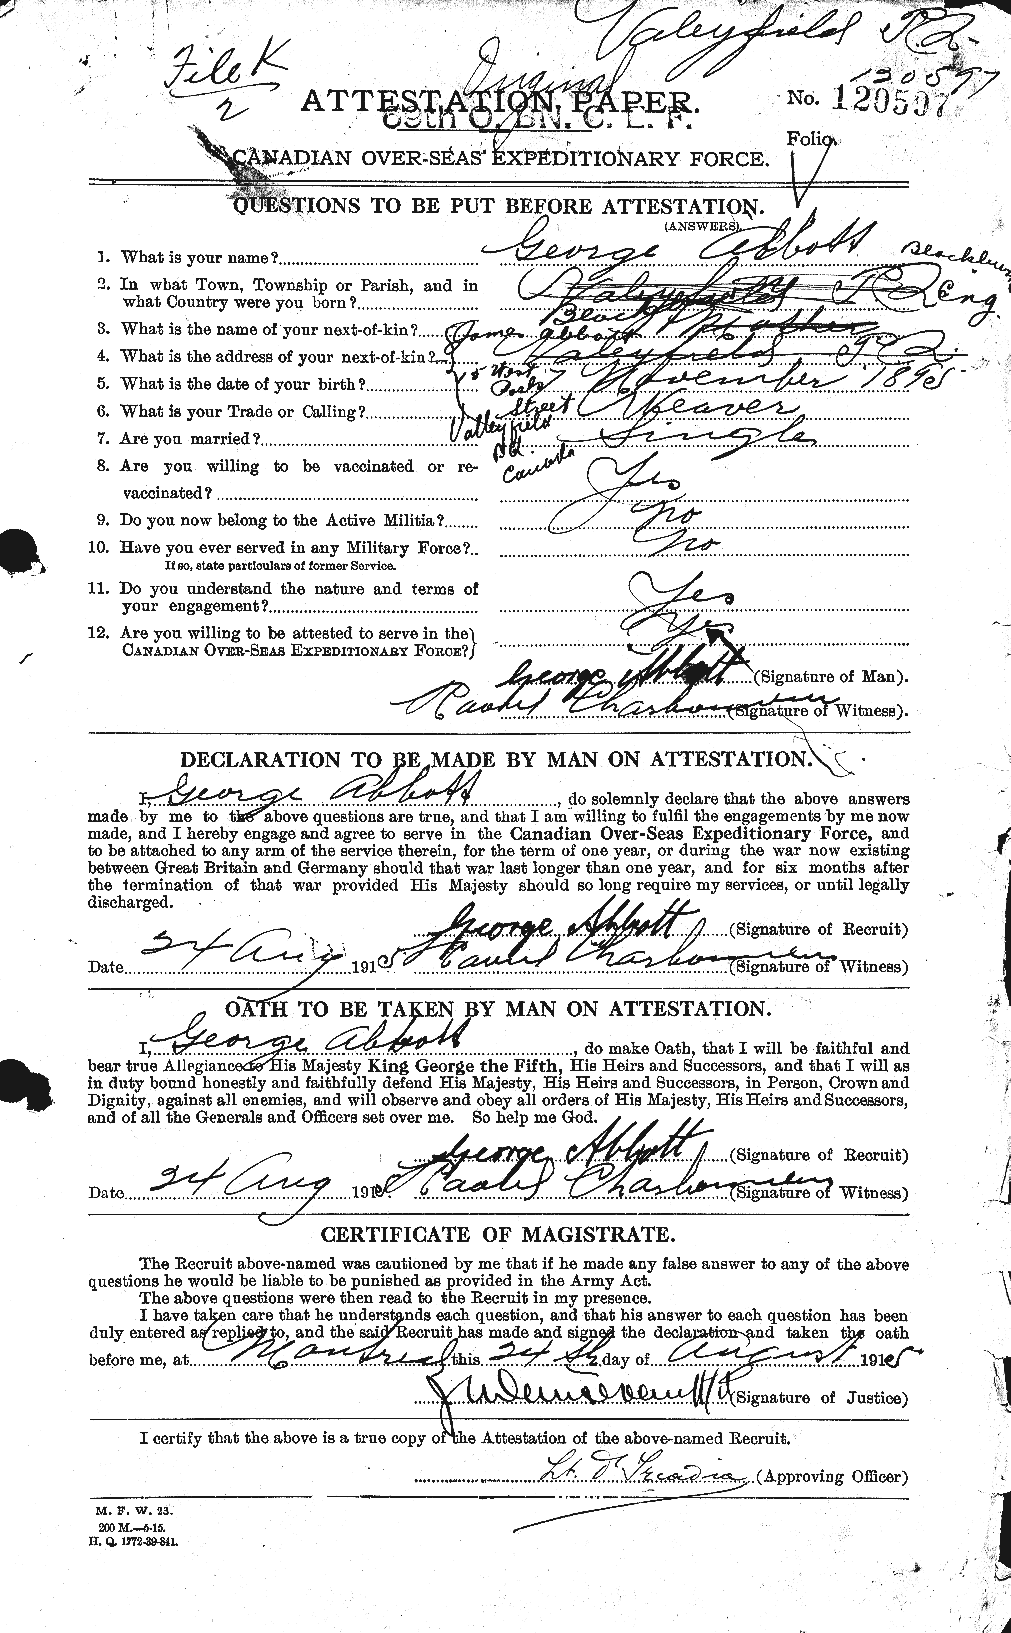 Personnel Records of the First World War - CEF 200930a